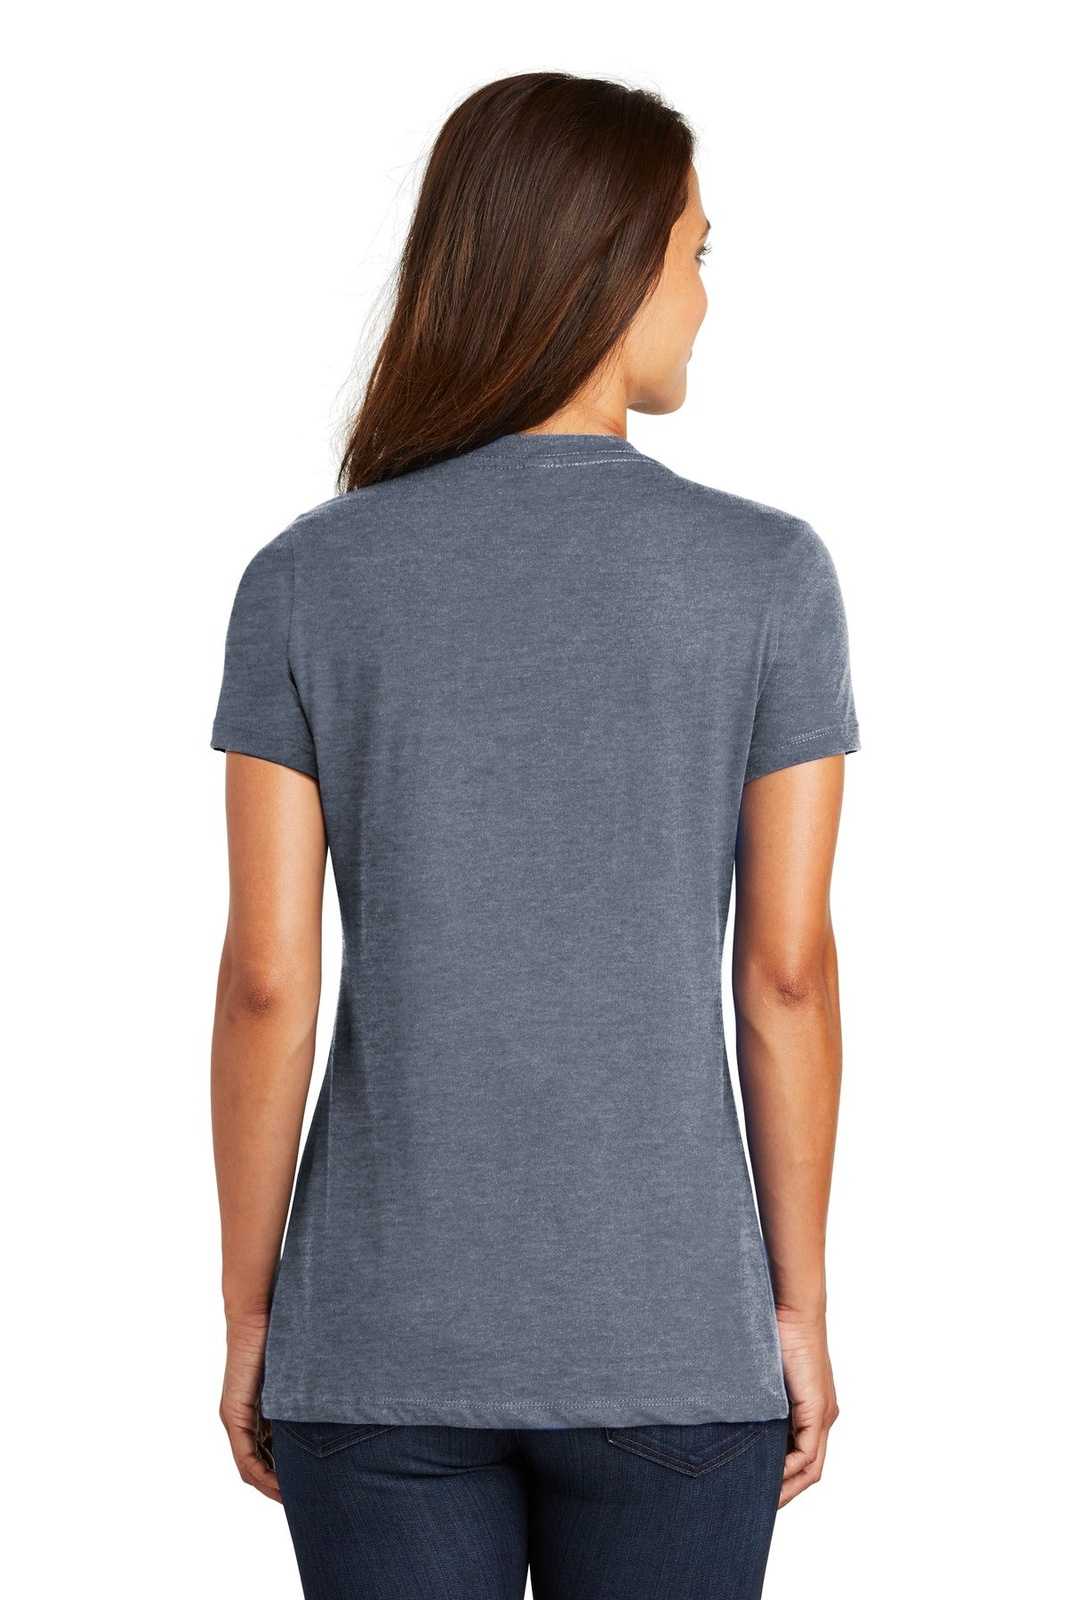 District DM1170L Women's Perfect Weight V-Neck Tee - Heathered Navy - HIT a Double - 1